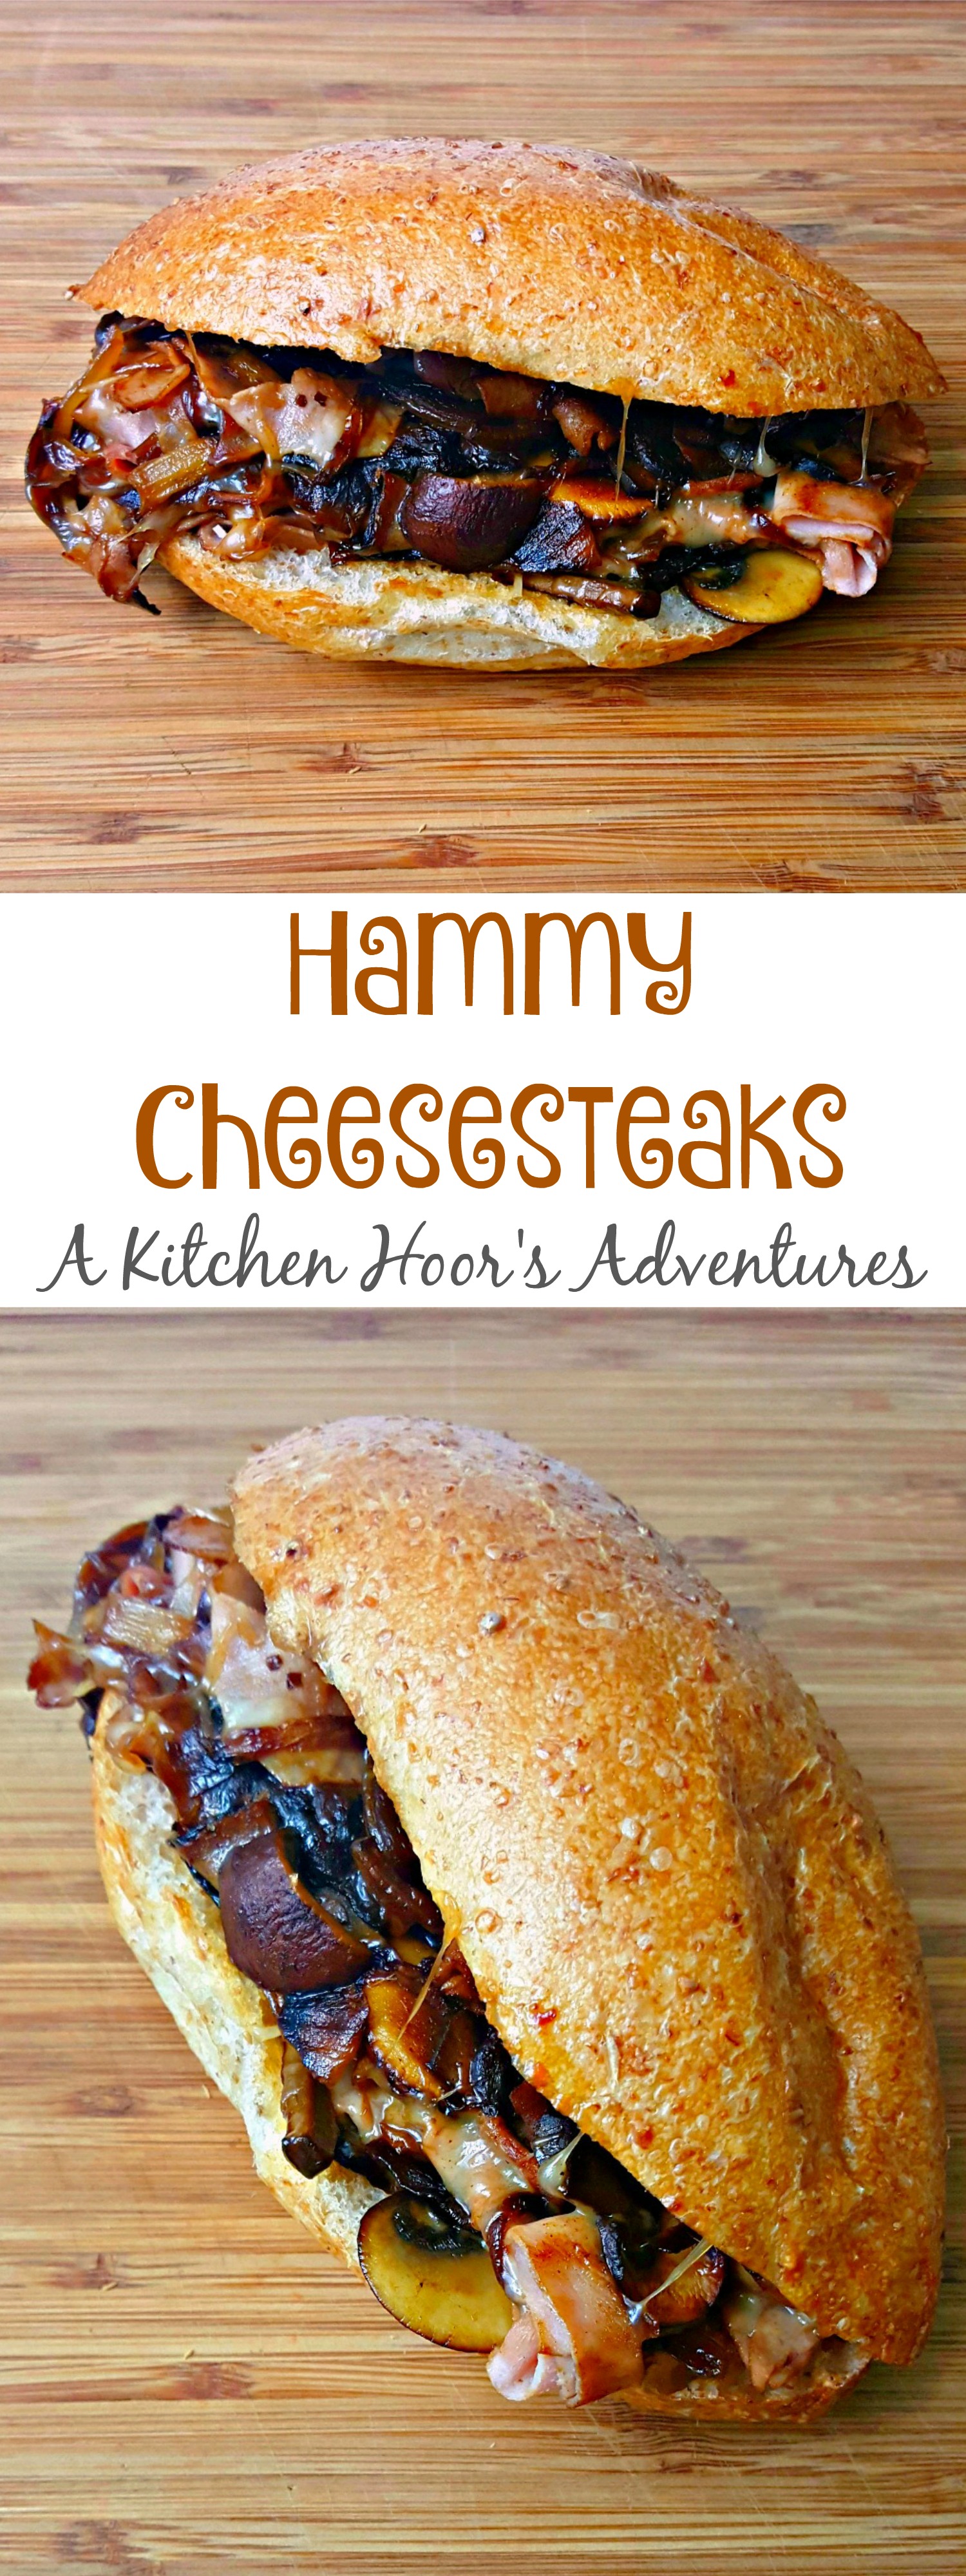 I married a ham and cheese and a cheesesteak together in these Not Your Average Ham and Cheese Sandwich aka Hammy Cheesesteaks; perfect for a take-out fake out meal or any night you’re looking for something quick and easy.